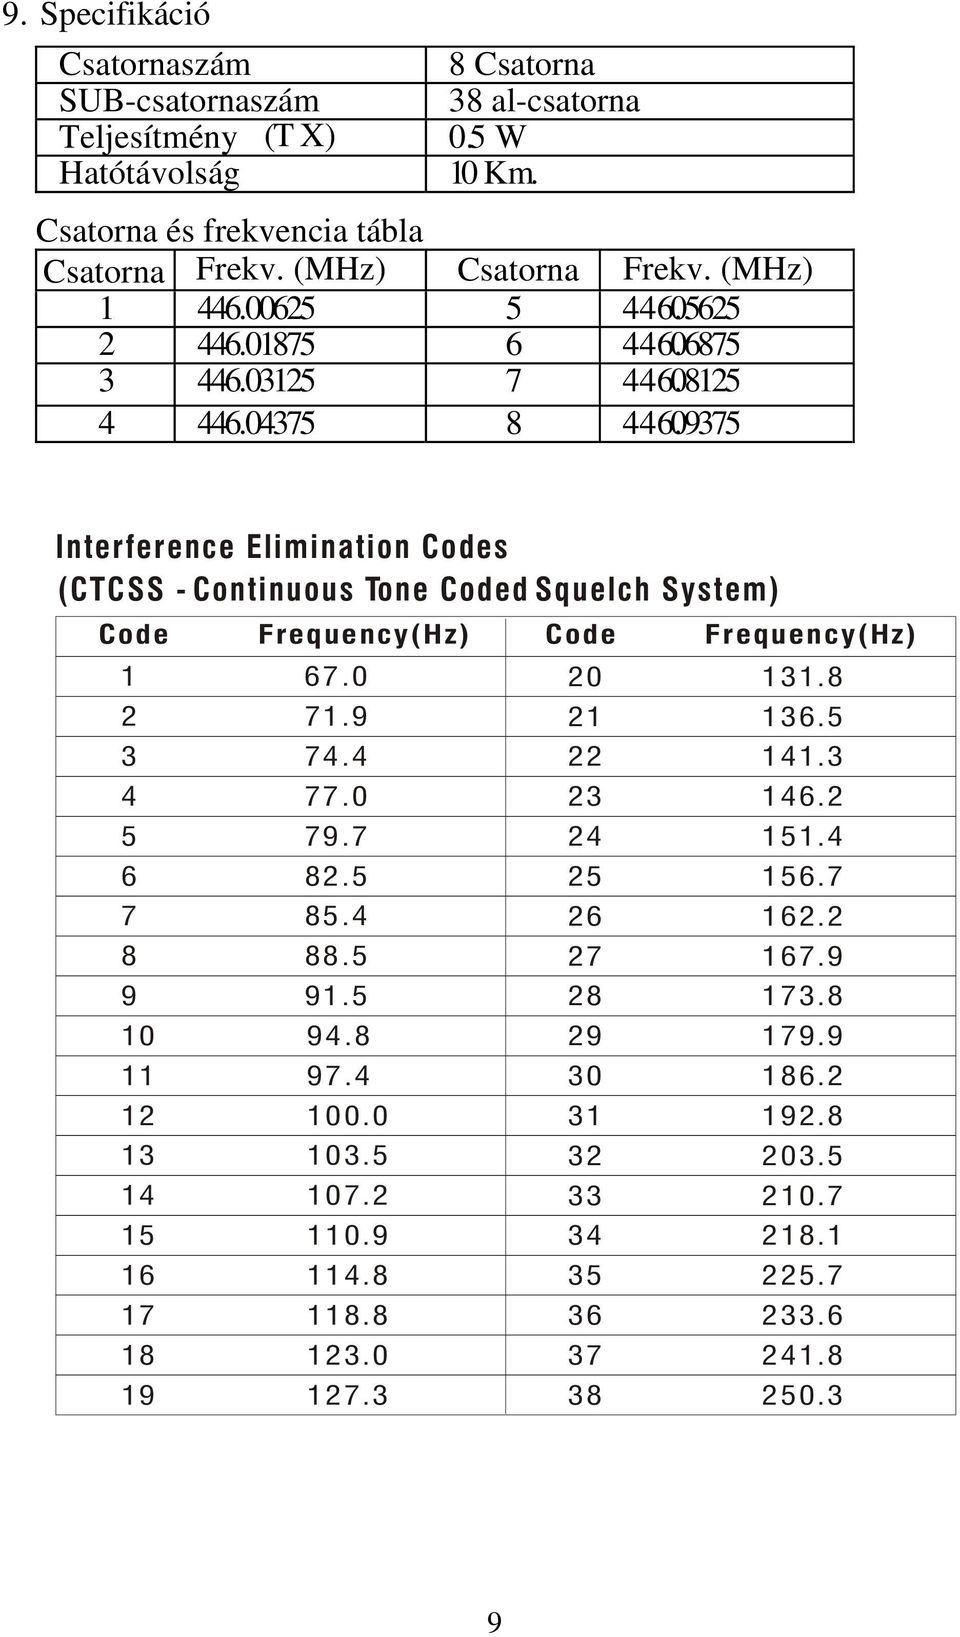 09375 Interference Elimination Codes (CTCSS - Continuous Tone Coded Squelch System) Code Frequency(Hz) 1 67.0 2 71.9 3 74.4 4 77.0 5 79.7 6 82.5 7 85.4 8 88.5 9 91.5 10 94.8 11 97.